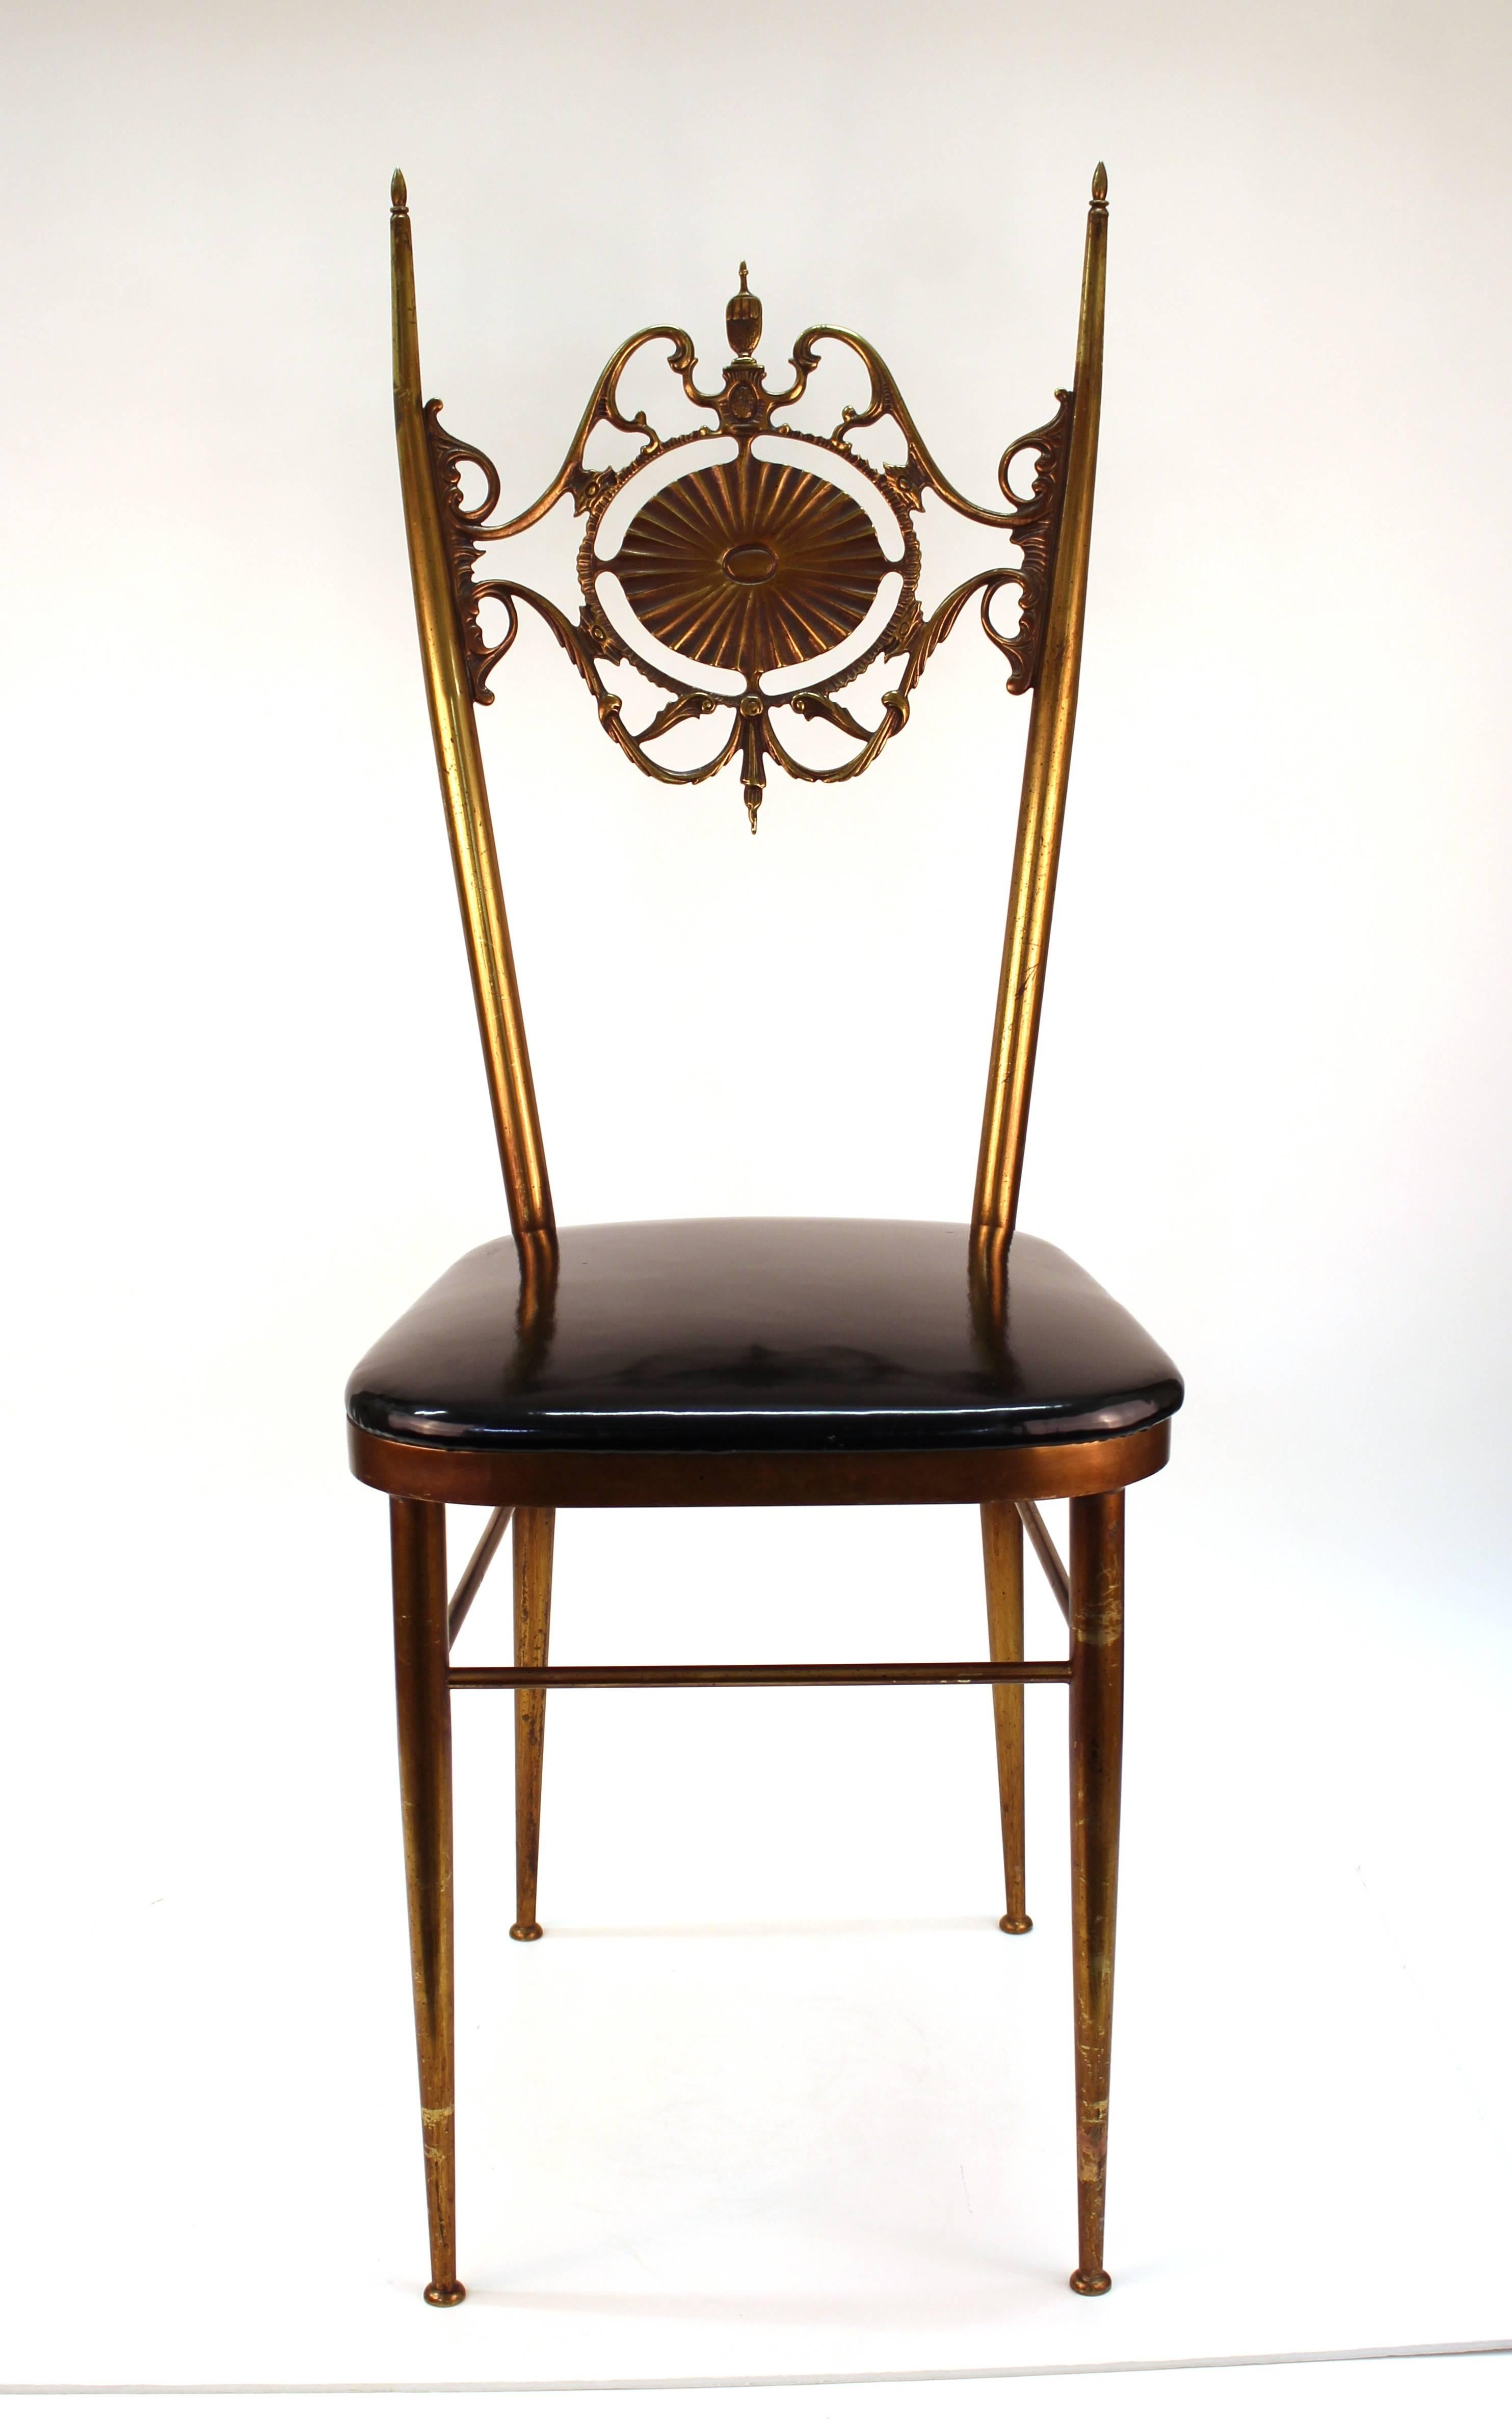 Chiavari side chair crafted in brass with black patent seat and elaborate splat. Features thin elongated back and legs. The ornate back includes scroll work and a sun disk with a relief depicting the myth of Leda and the Swan on the reverse. The